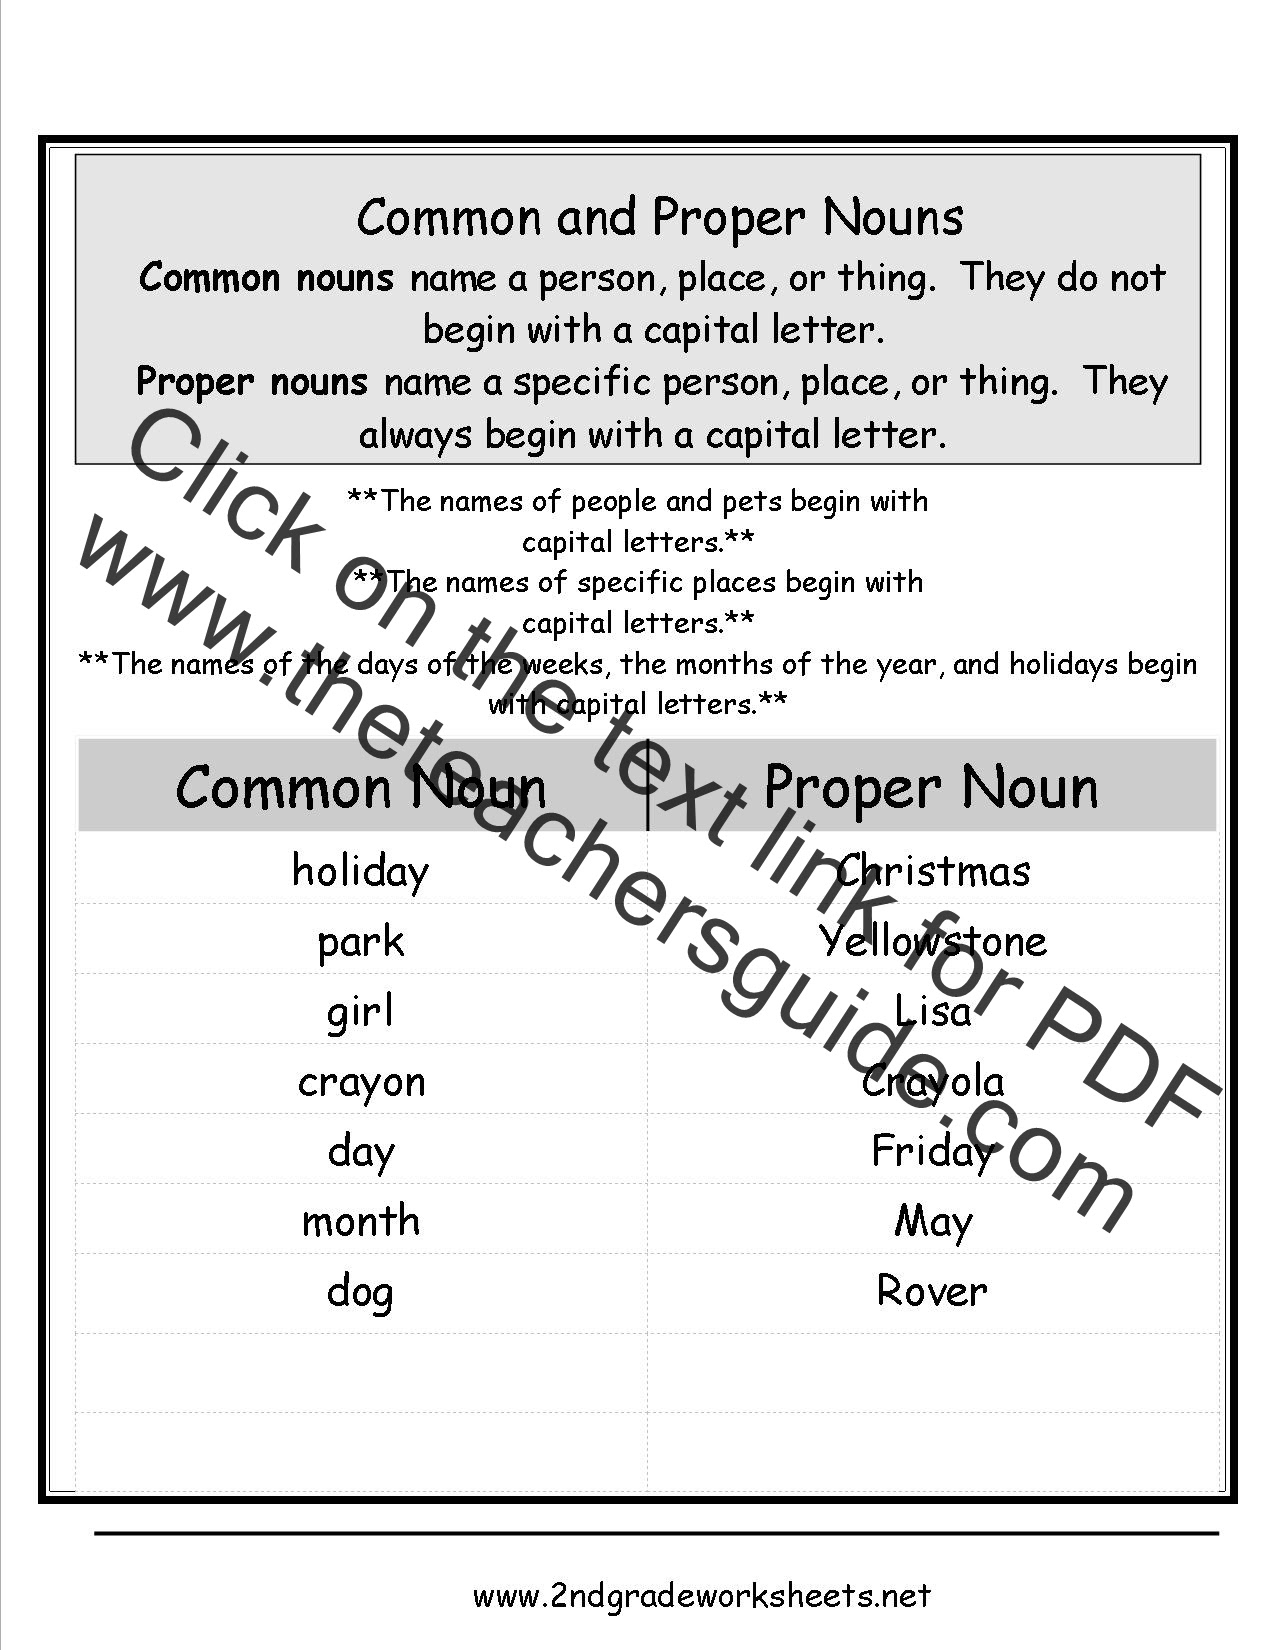 nouns-worksheets-proper-and-common-nouns-worksheets-common-and